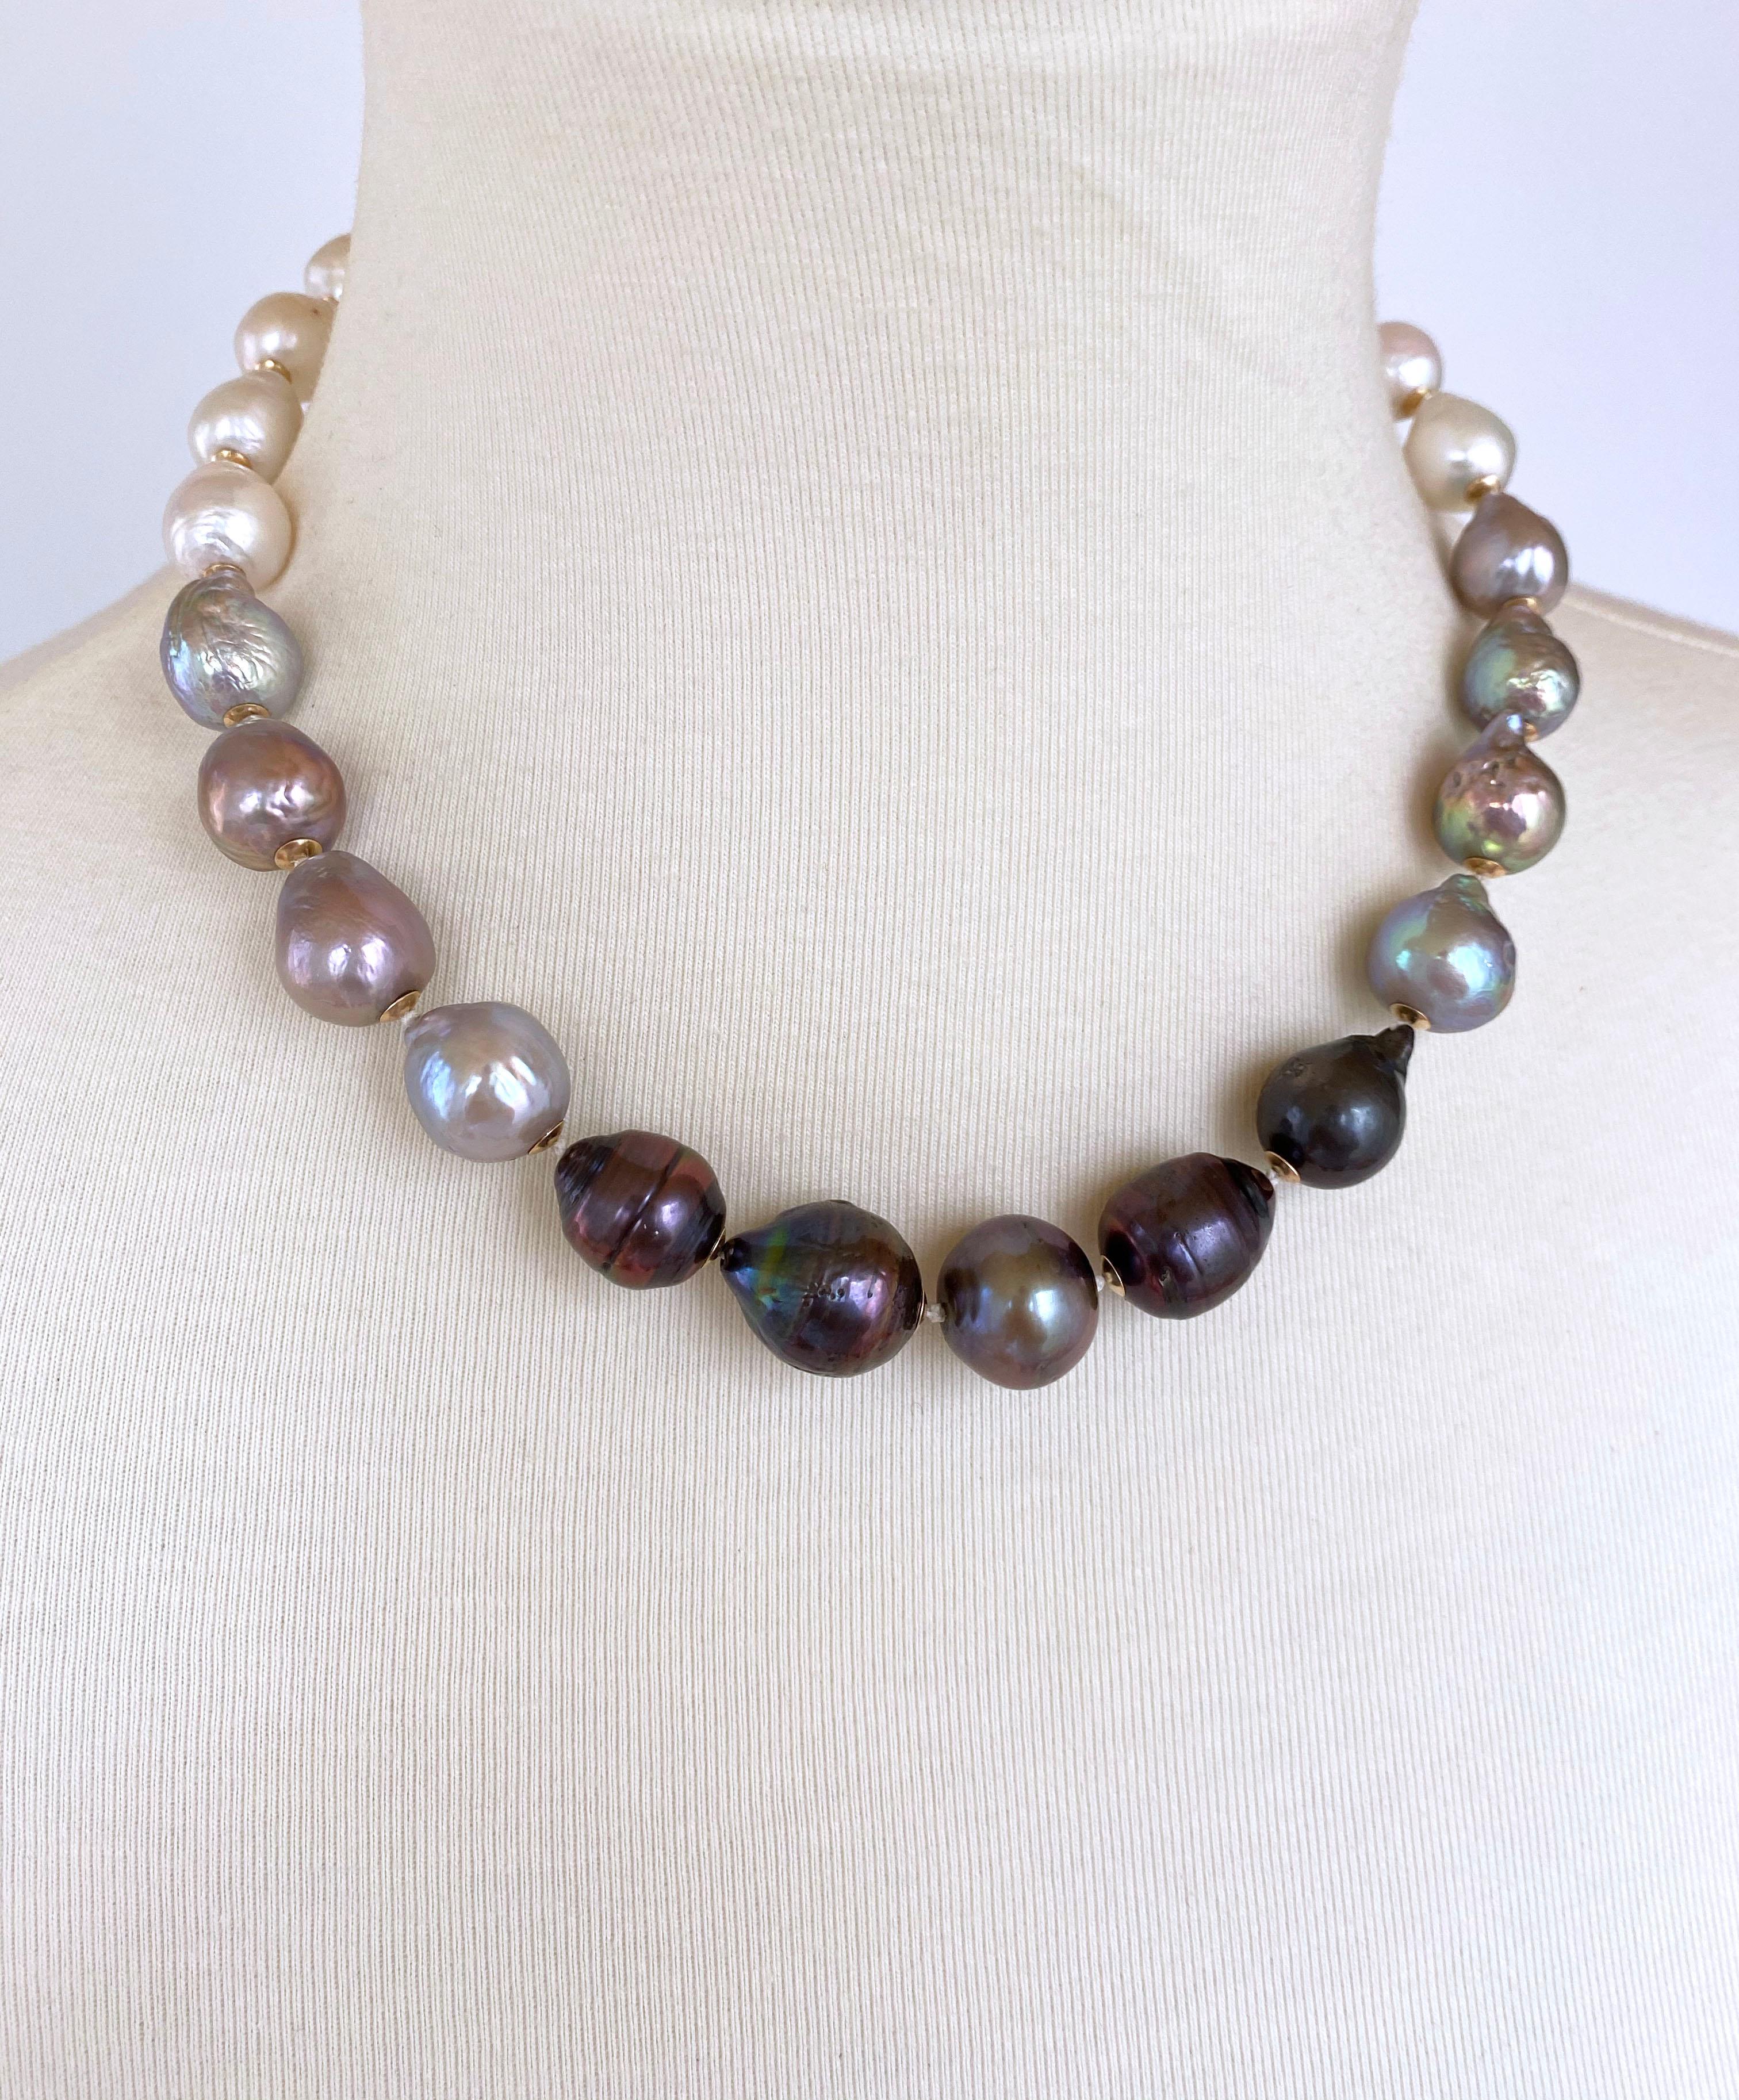 Gorgeous yet simple piece from Marina J. This beautiful necklace features high luster Baroque Black, Grey and White Pearls all carefully strung together to create the perfect ombre. Pearls graduate in size from light to dark, giving this piece a